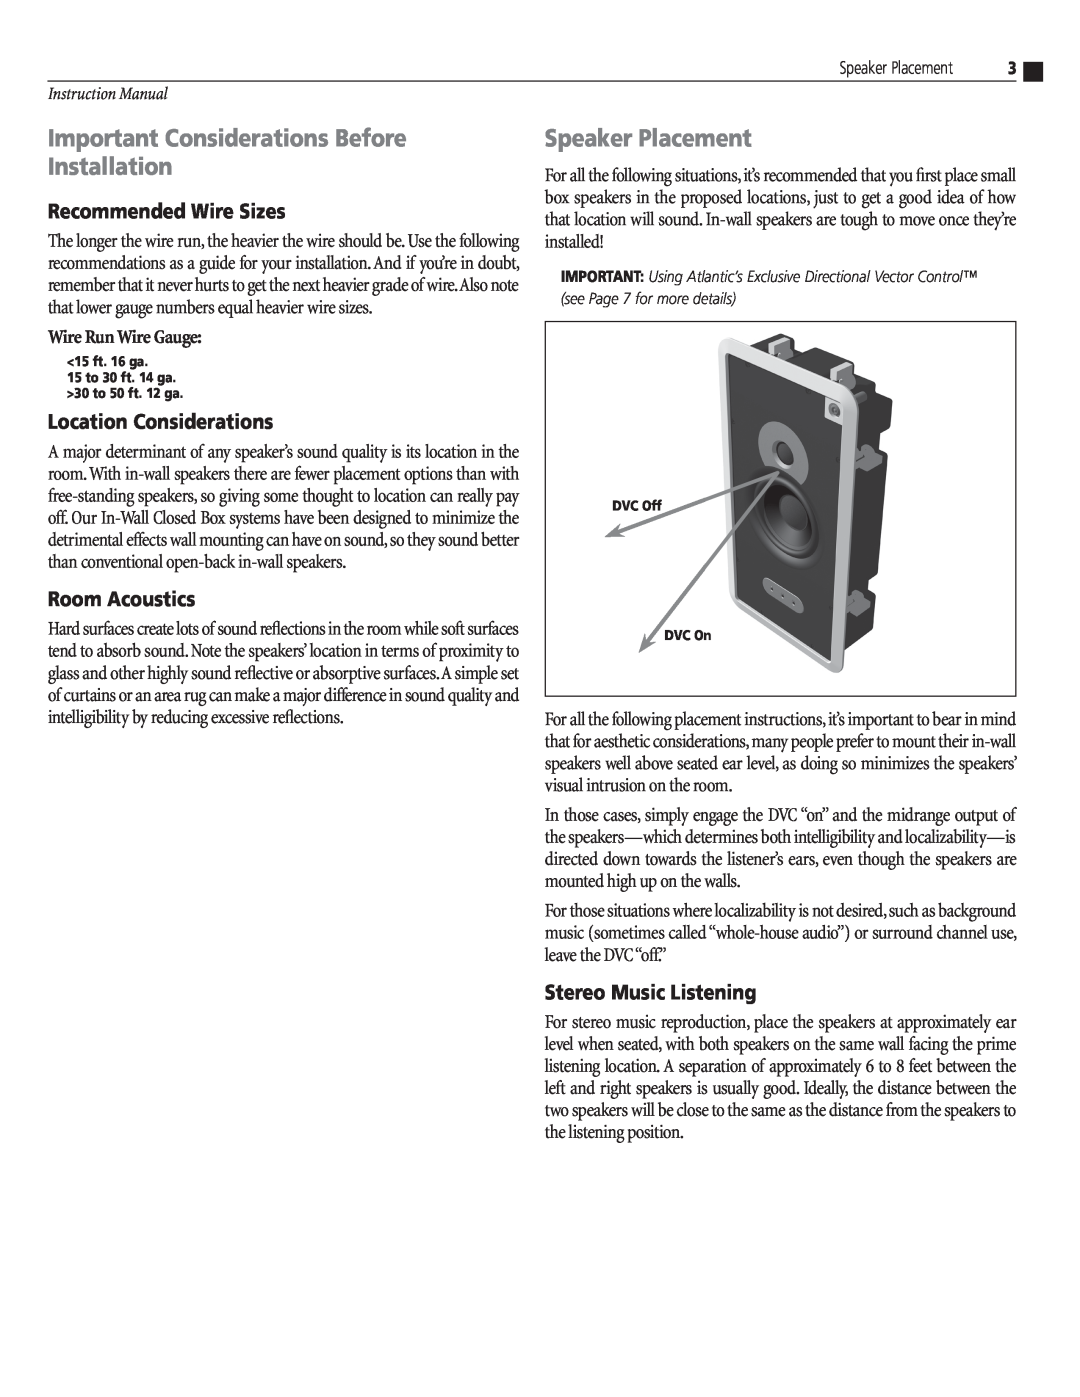 Atlantic Technology IWCB-525 Important Considerations Before Installation, Speaker Placement, Recommended Wire Sizes 